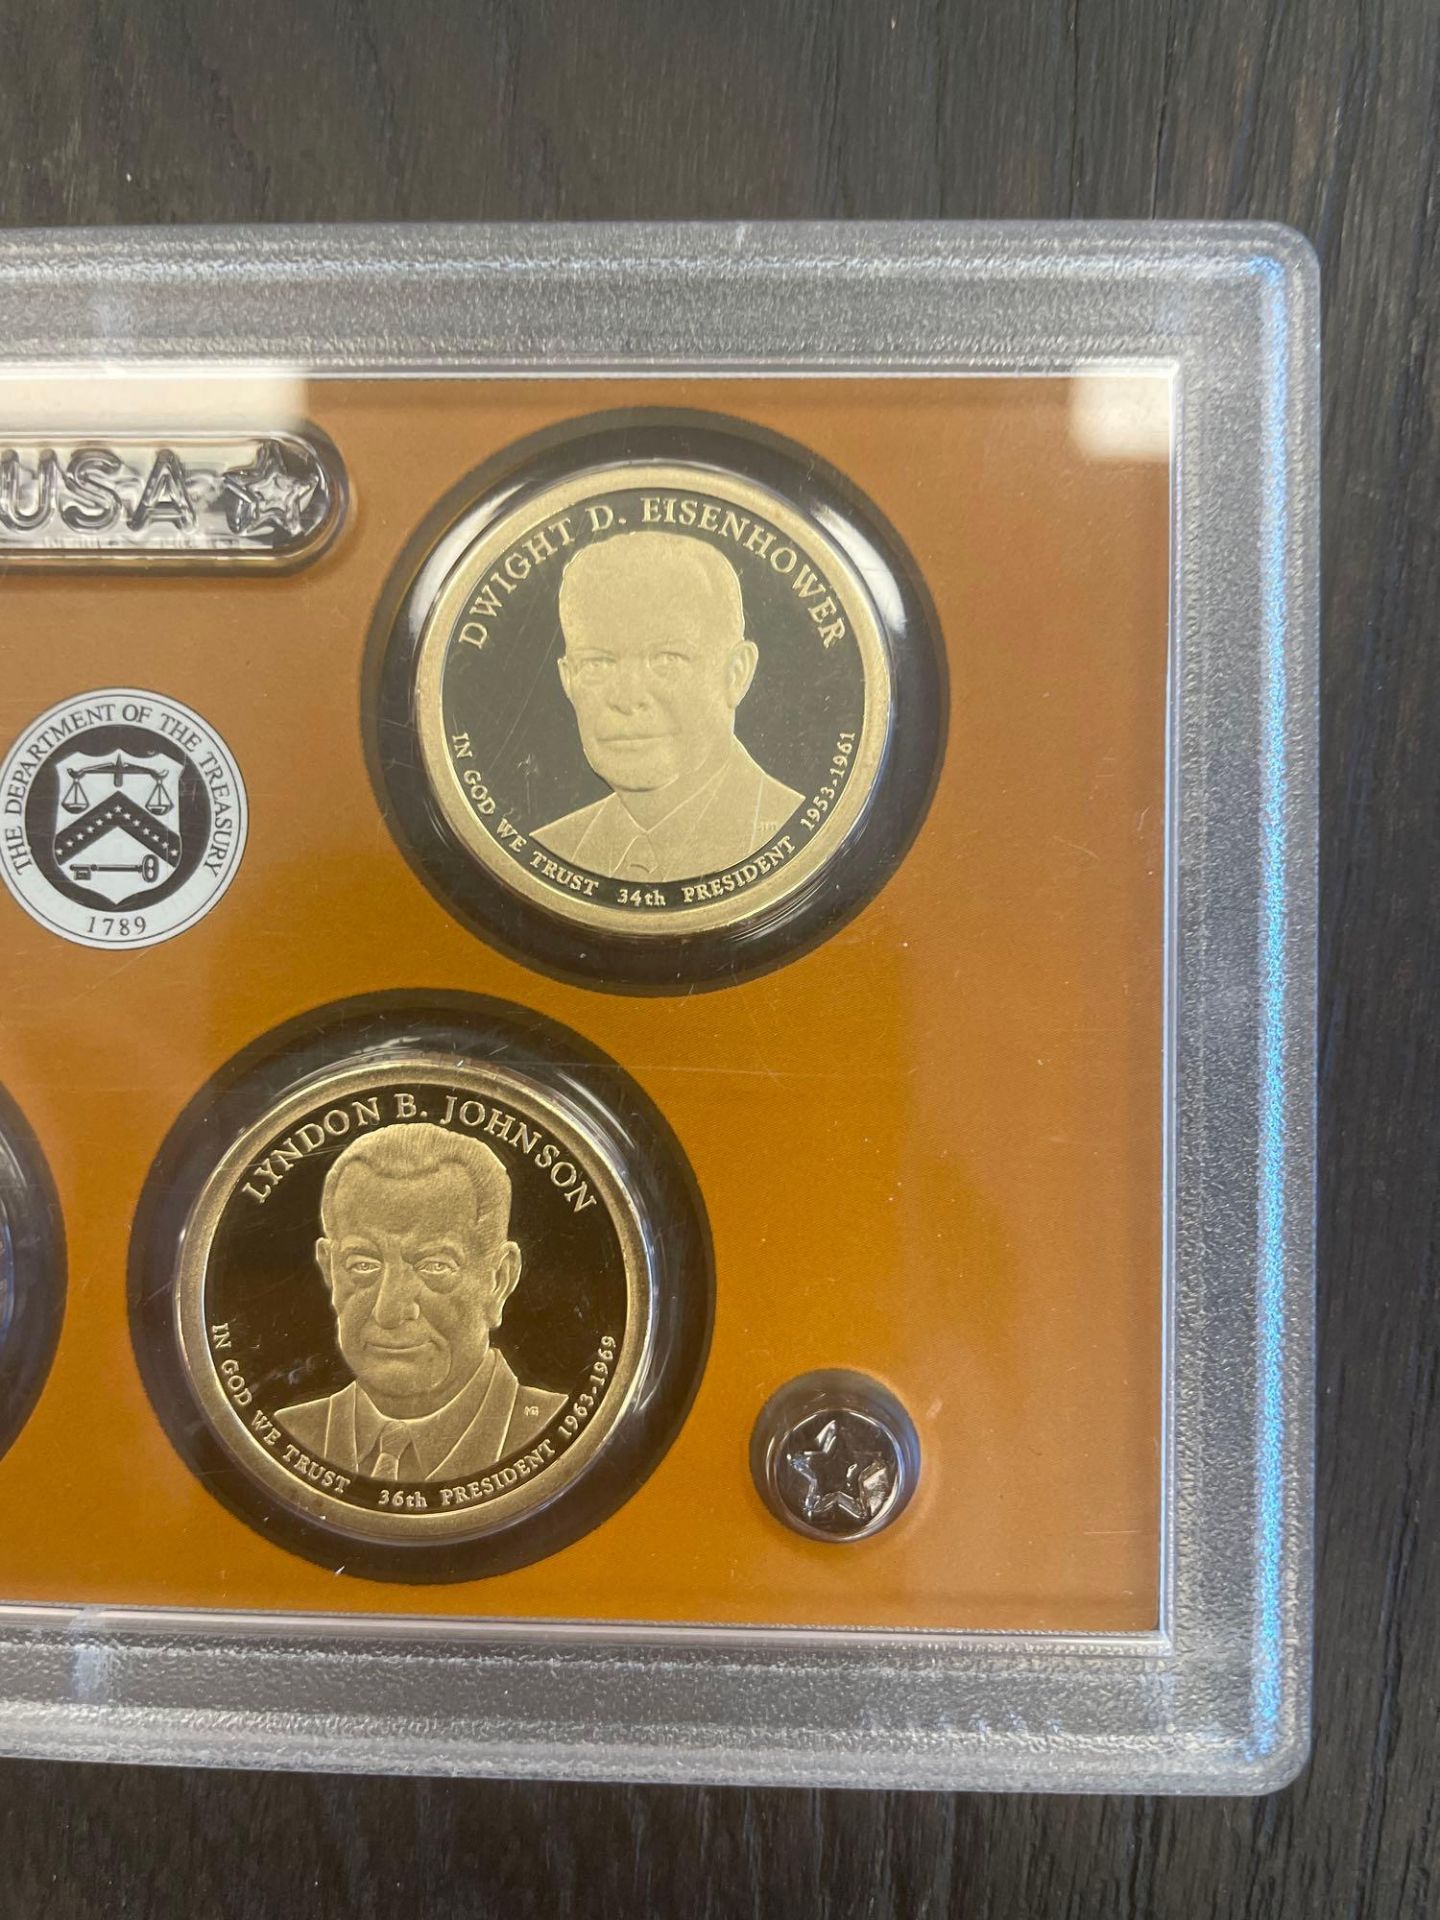 $1 Dollar Presidents Coins - Image 4 of 4